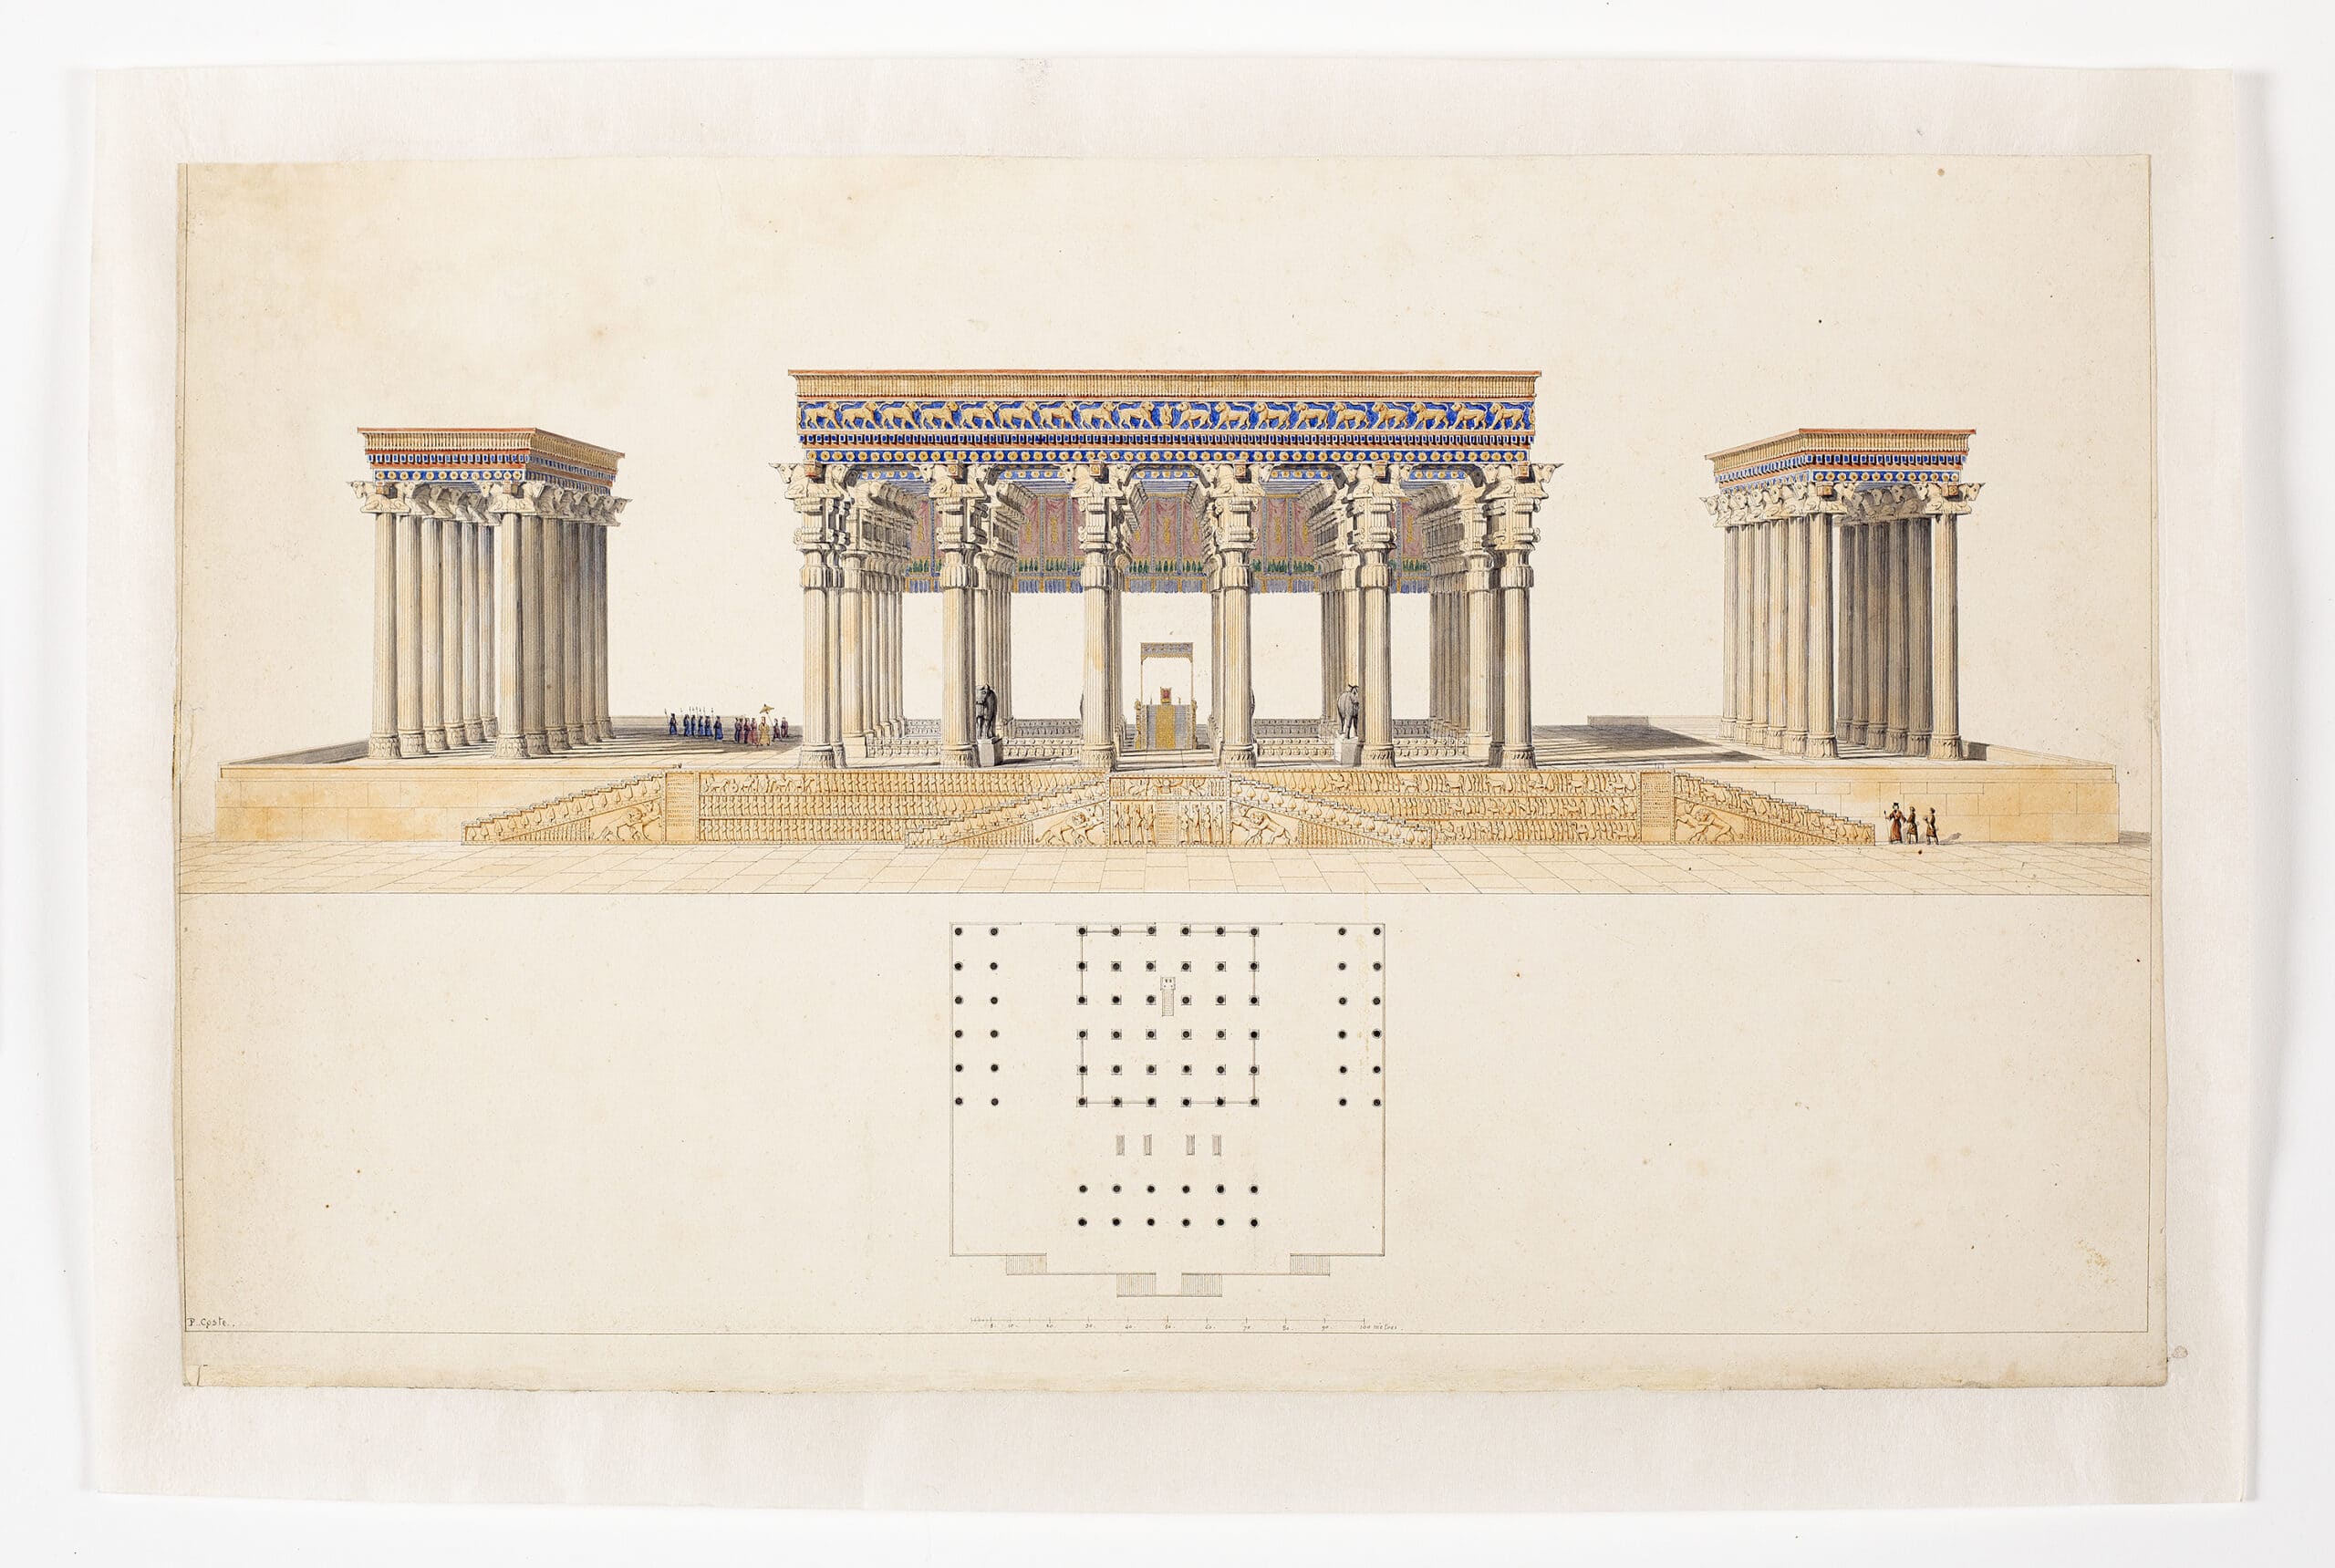 Image of The several columns at Persepolis and Istakhr compared (engraving)  by Perrot, Georges (1832-1914) and Chipiez, Charles (1835-1901)